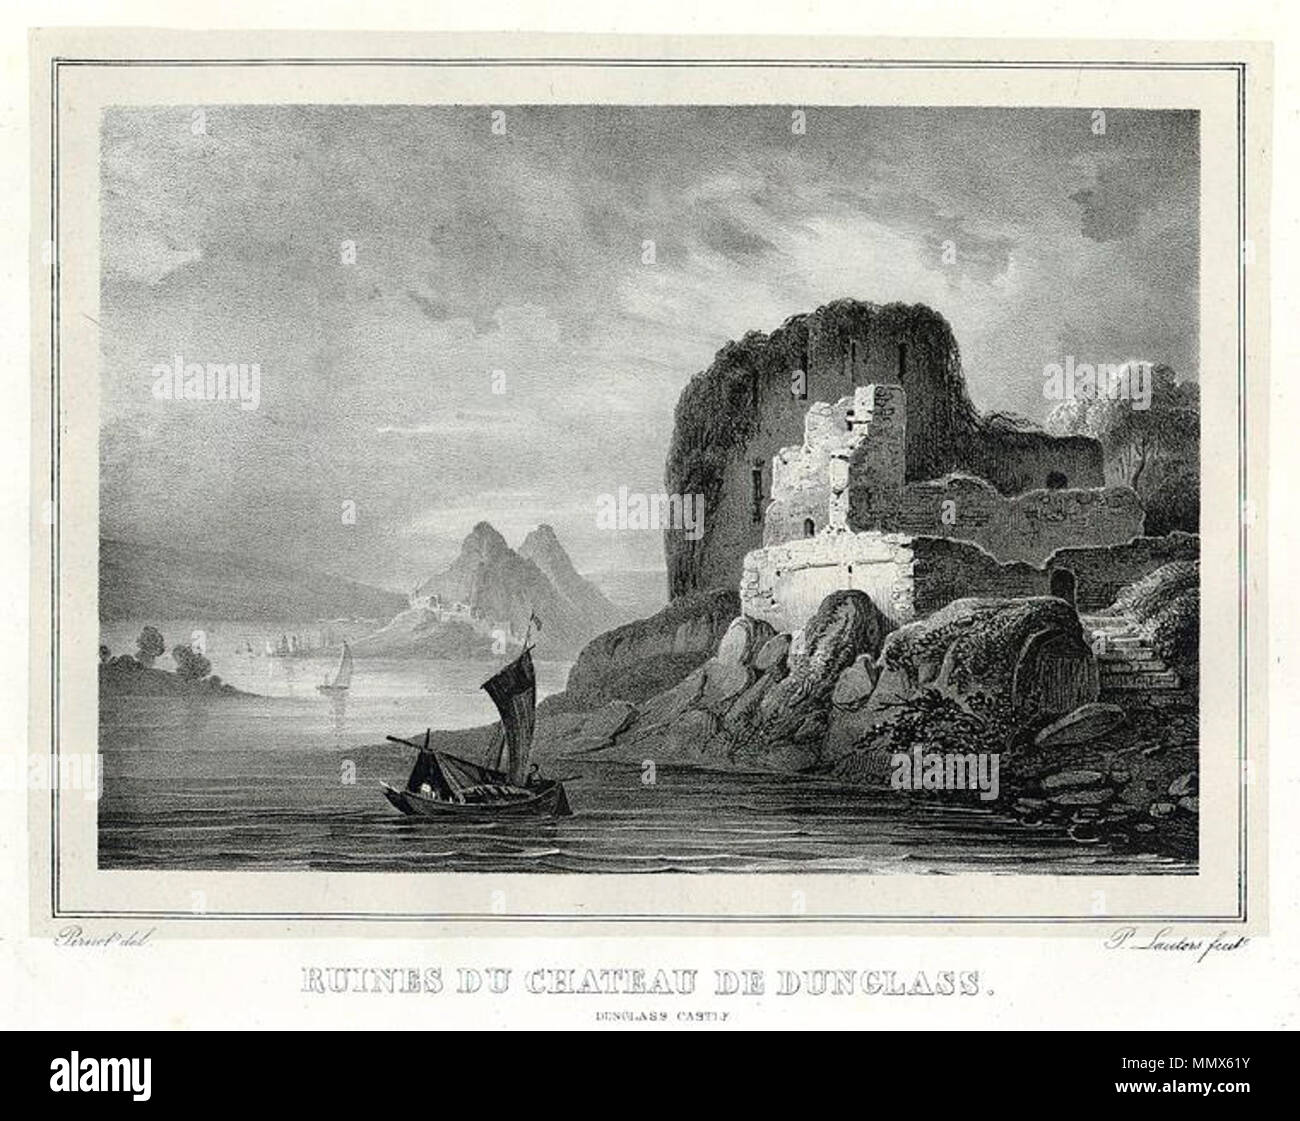 . 'Ruines du Chateau de Dunglass, Dunglass Castle' drawn by F.A.Pernot and printed by A.Dewasme. Published in Vues Pittoresque De L'Ecosse,1827. This cannot be Dunglass Castle, East Lothian, because that building was some distance inland, next to a stream, whereas this image is clearly next to a substantial body of water, i.e. The Clyde.  . 1827. Drawn by F.A.Pernot and printed by A.Dewasme Dunglass Castle Stock Photo